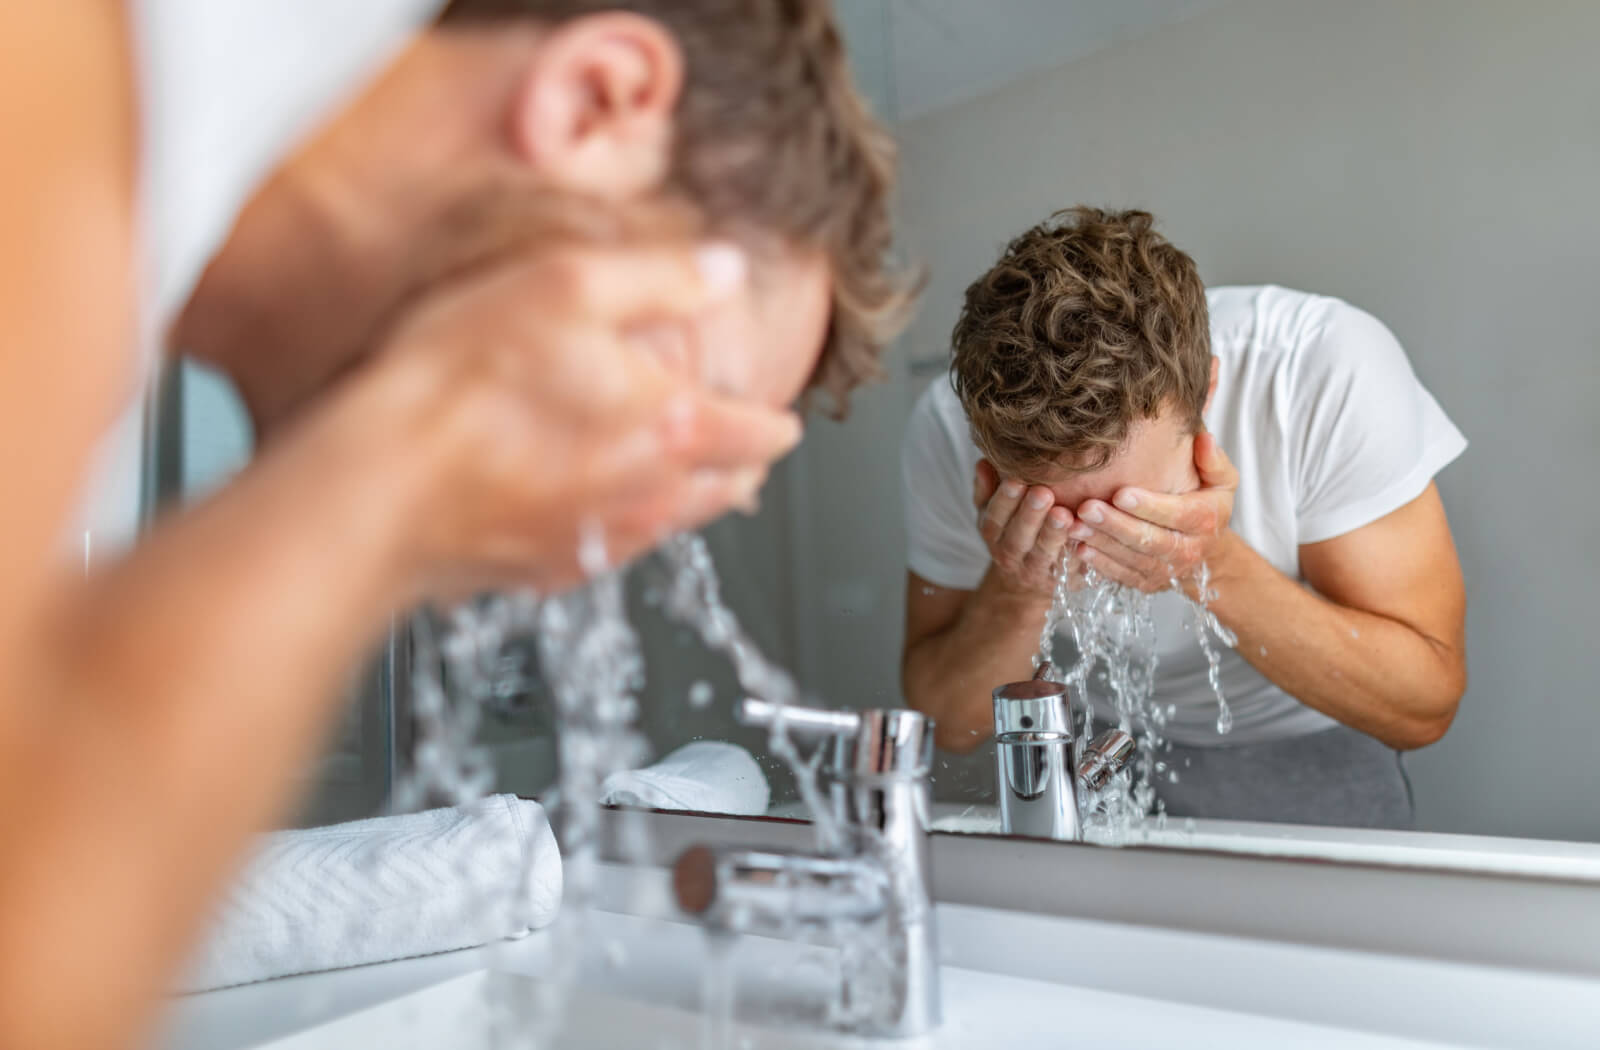 A man washing his face with water in front of a bathroom mirror.